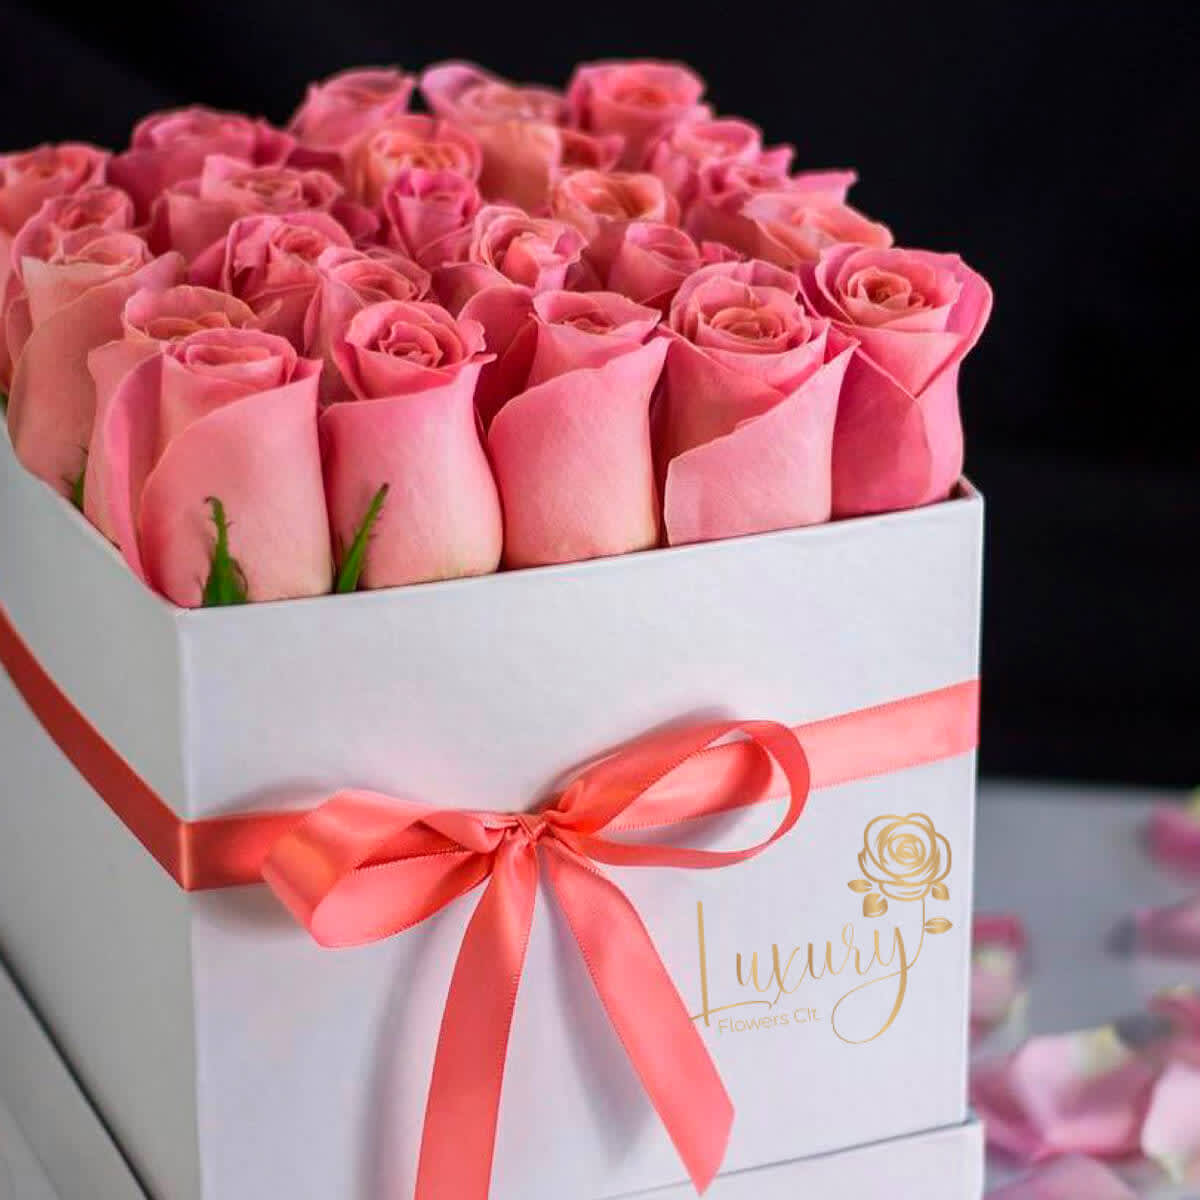 Forever Mine-Pink - •	Roses in Box: 24-30 stems of natural roses. •	Color Flower: Pink •	Color Box: White or Black (subject to inventory availability) •	All Occasion •	Place your Order Online Monday to Saturday before 1:00 p.m. (E.T.) for same-day          delivery.  •	“Orders received after hours will be delivered the next business day”. •	Check our coverage area. •	Occasionally, substitutions of flowers and/or containers happen due to weather,          seasonality, and market conditions which may affect availability. If this is the case with          the gift you’ve selected, we will ensure that the style, theme, and color scheme of your          arrangement are preserved and will only substitute items of equal value or higher value.  CARE INSTRUCTIONS Gently mist the arrangement with natural water every other day. Do not spray any cleaning product on the flower arrangement. Do not place heavy objects directly on the flower arrangement. Keep them out of direct sunlight and extreme heat. 